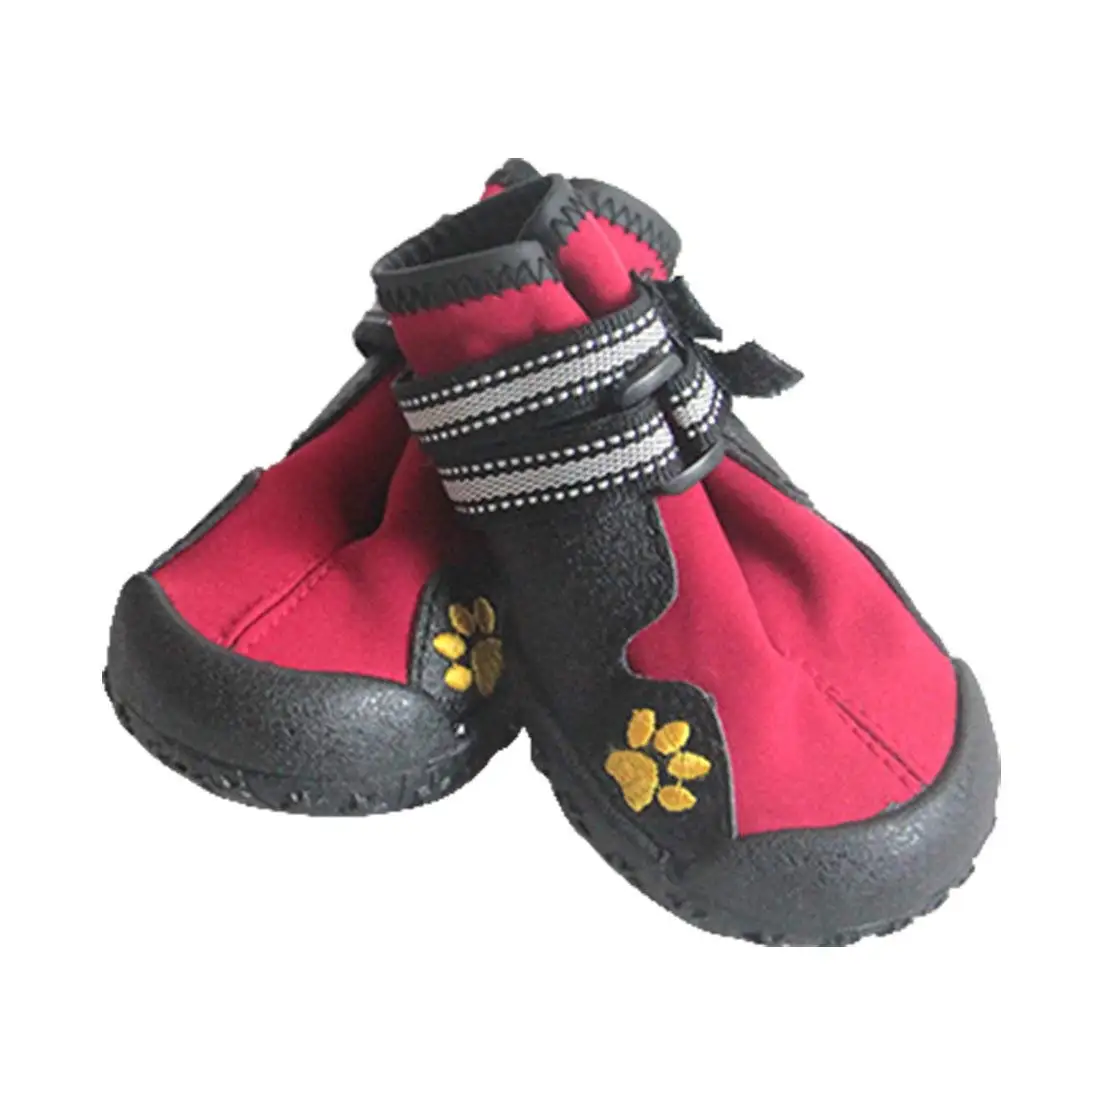 Buy Axchongery Boots,Dog Rubber Waterproof Shoes Rain Boot Candy Colors ...